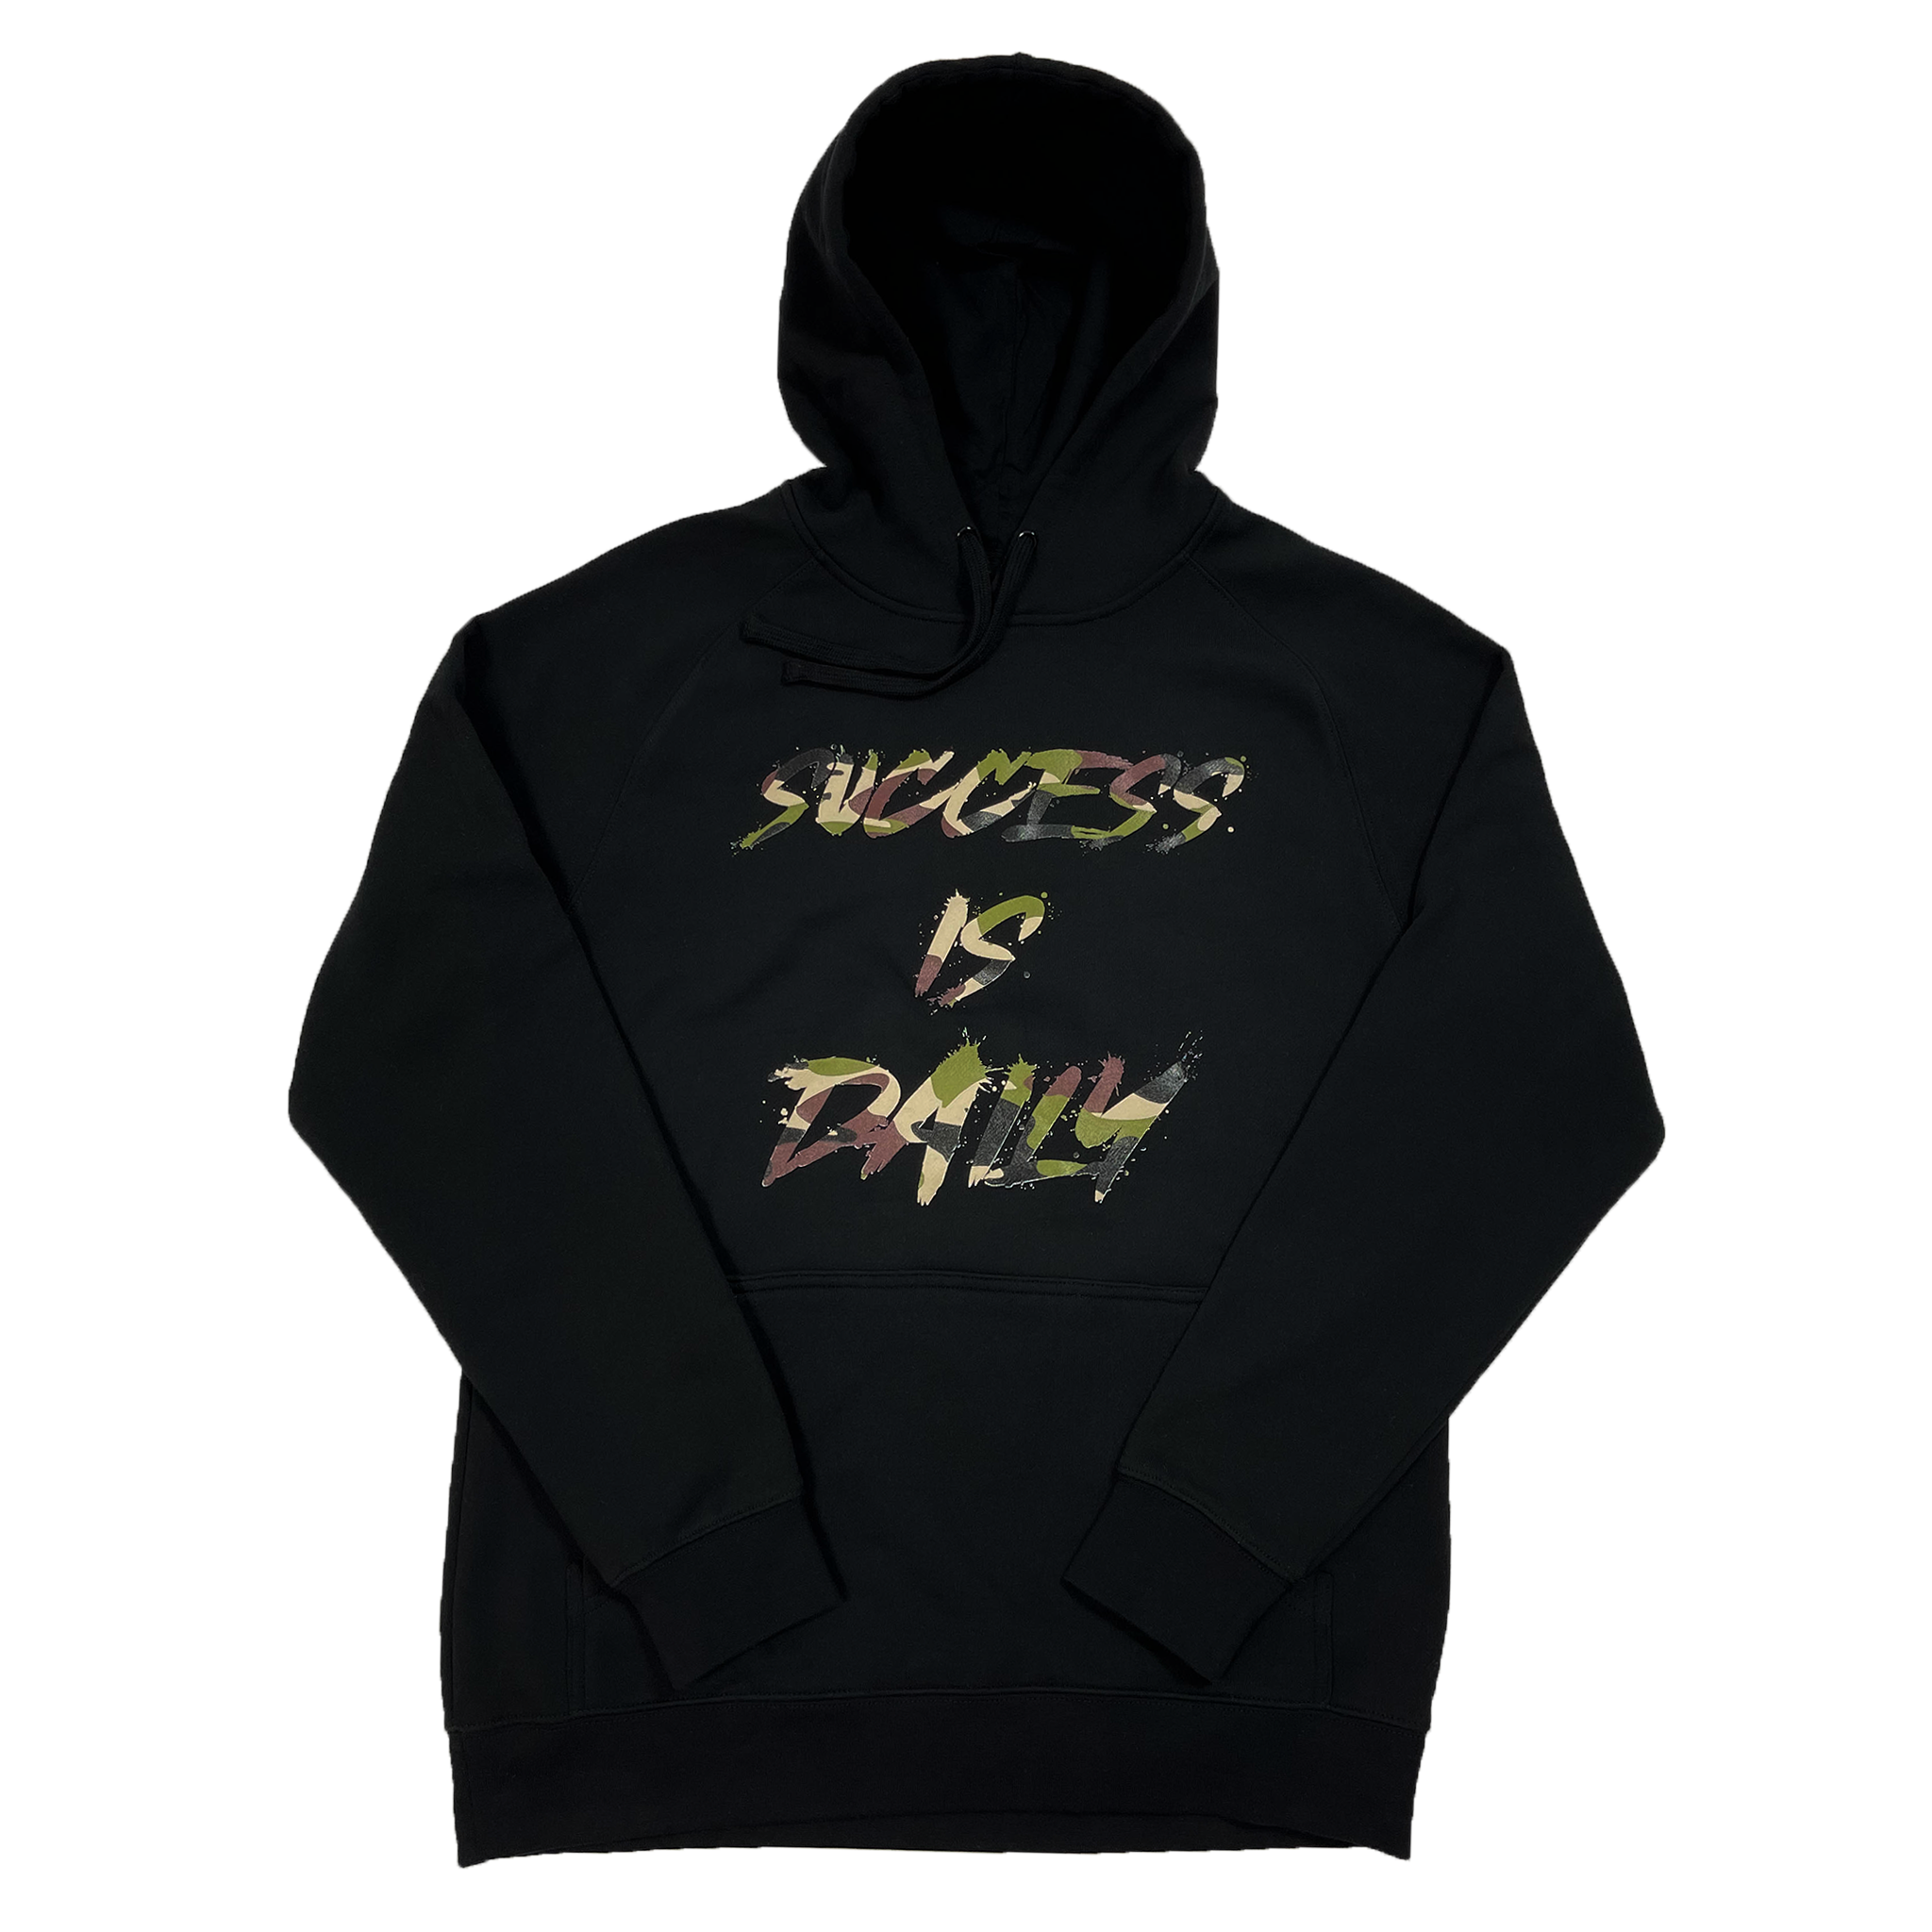 KP conquer it hoodie – Keep Pushing